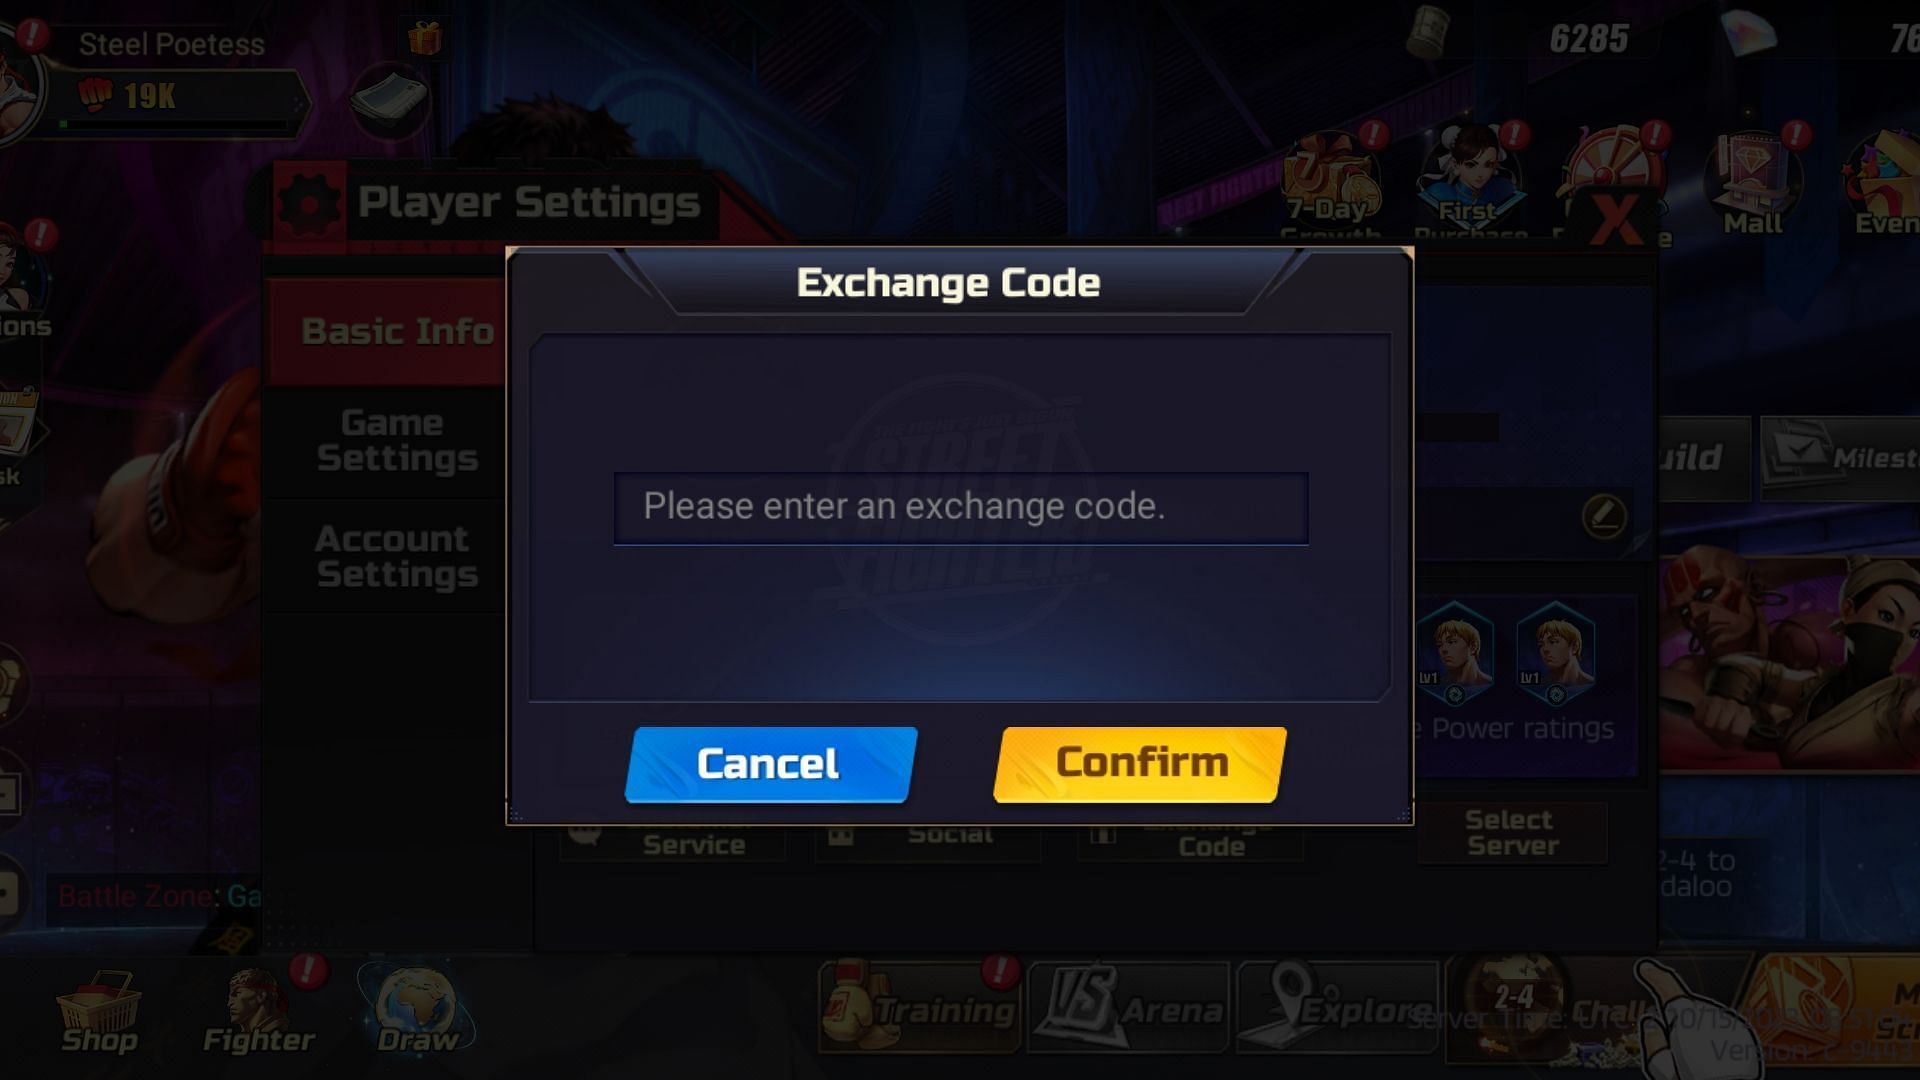 Copy-paste or enter the code into the box and hit the Confirm button to claim freebies. (Image via Crunchyroll Games)